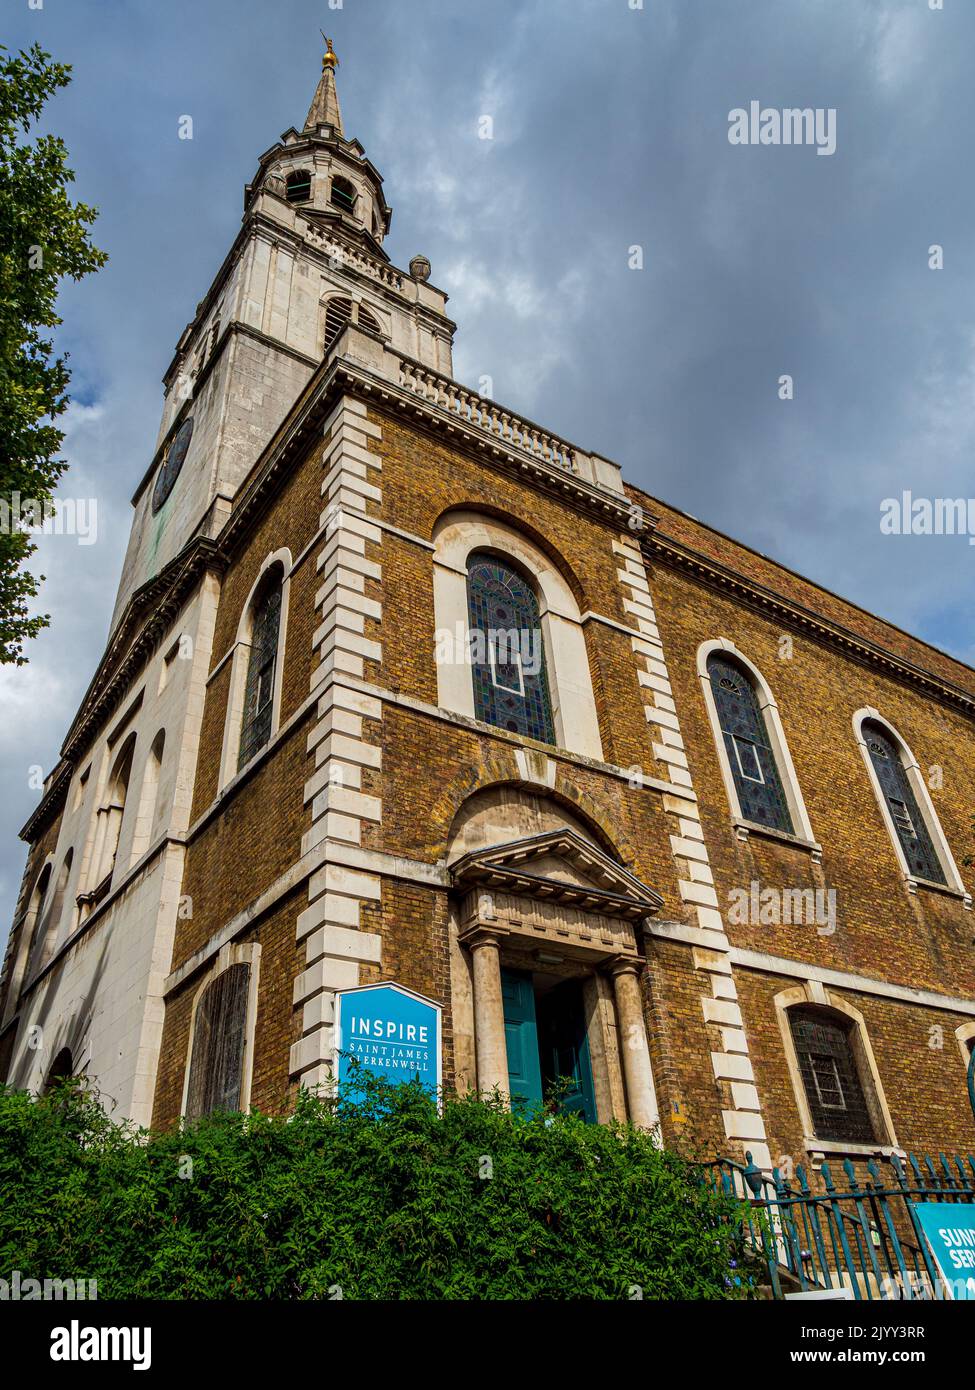 St James's Church, Clerkenwell - Anglican church, the current building dates from 1792, built on the site of a C12th nunnery and earlier church. Stock Photo